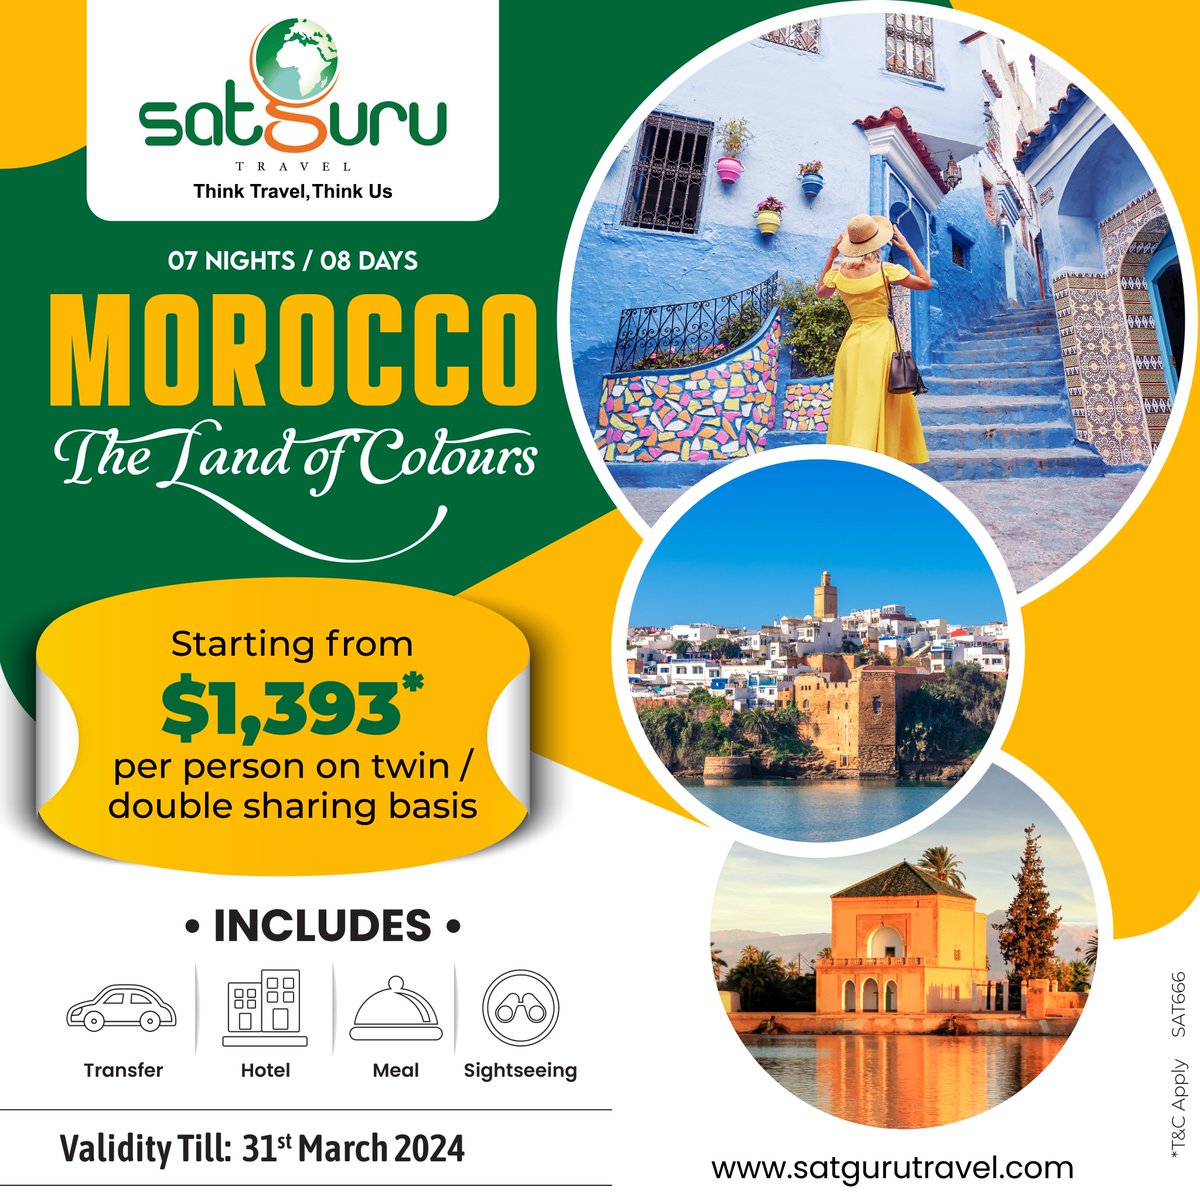 Discover the magic of Morocco with our exclusive package at $1393! 

Visit:  satgurutravel.com/exclusive-offe… 
.
.
.
.
#MoroccoAdventure #LandOfColors #Morocco #satgurutravel #travel #holiday #holidaypackage #ExploreMorocco #MoroccoAdventure  #trip #tour #vacation  #traveling  #explore